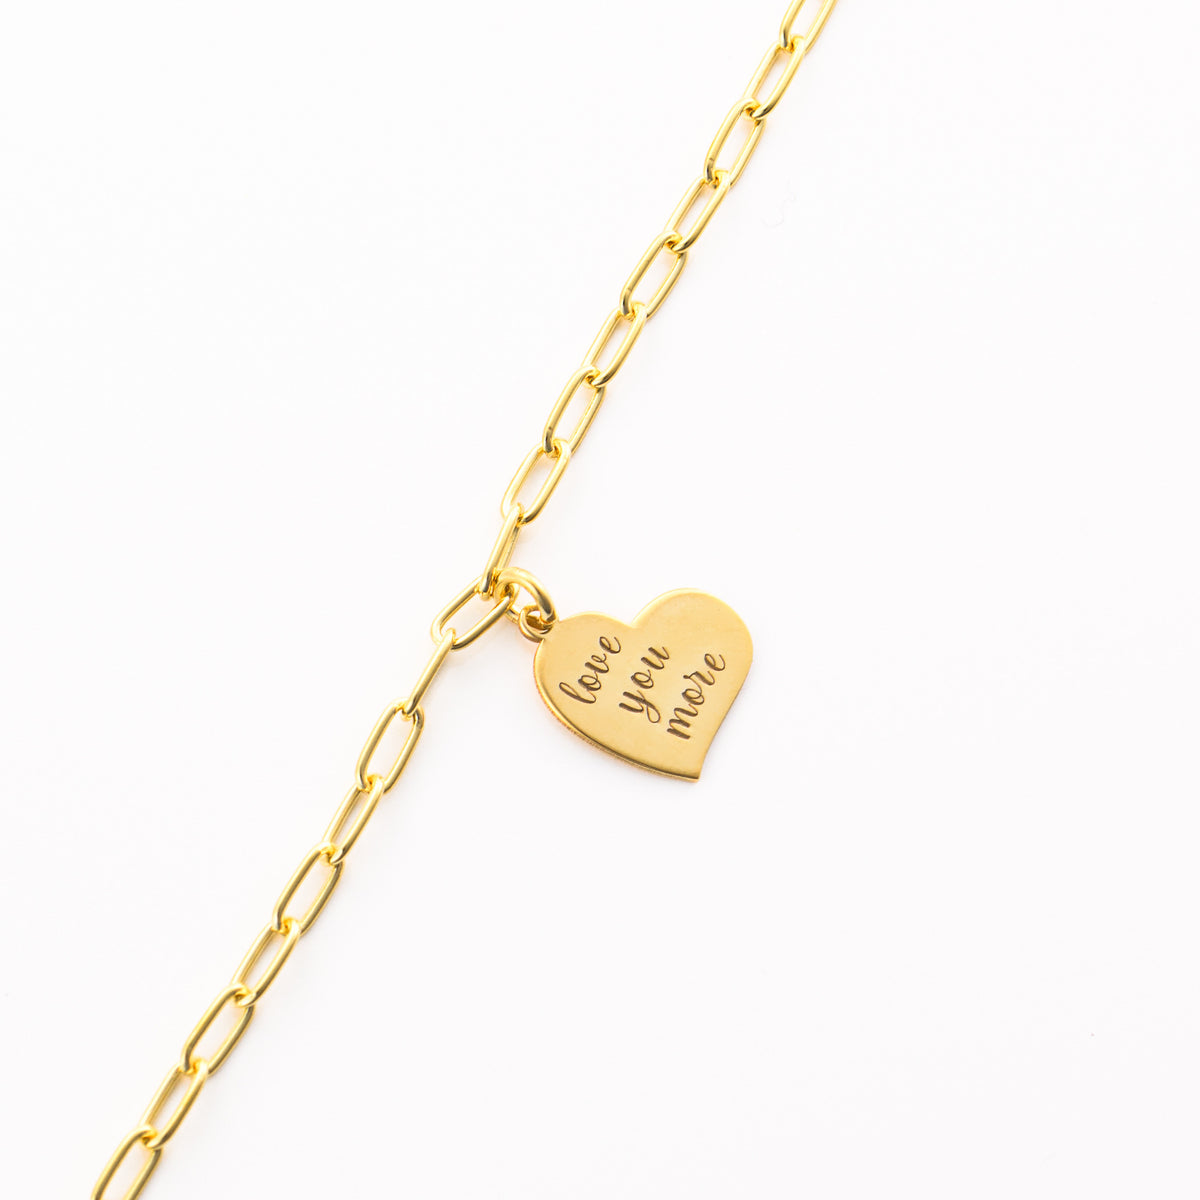 Love you more bracelet, gold plated silver